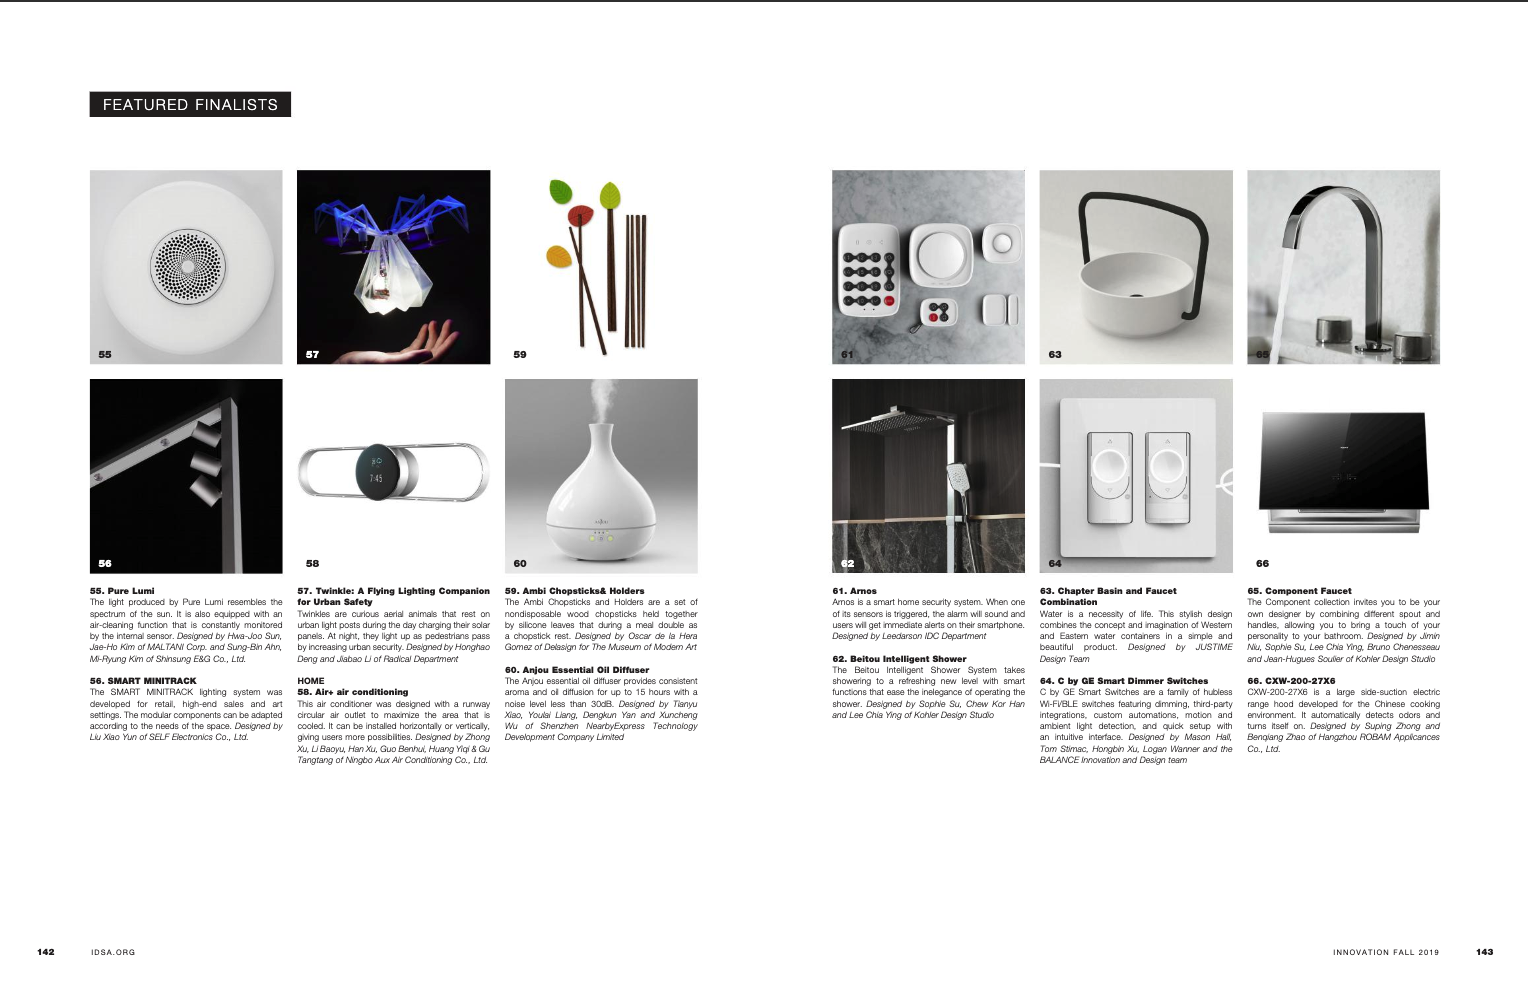 A picture of the Ambi Chopsticks and Holders featured in the Innovation Yearbook of Design Excellence (2018).